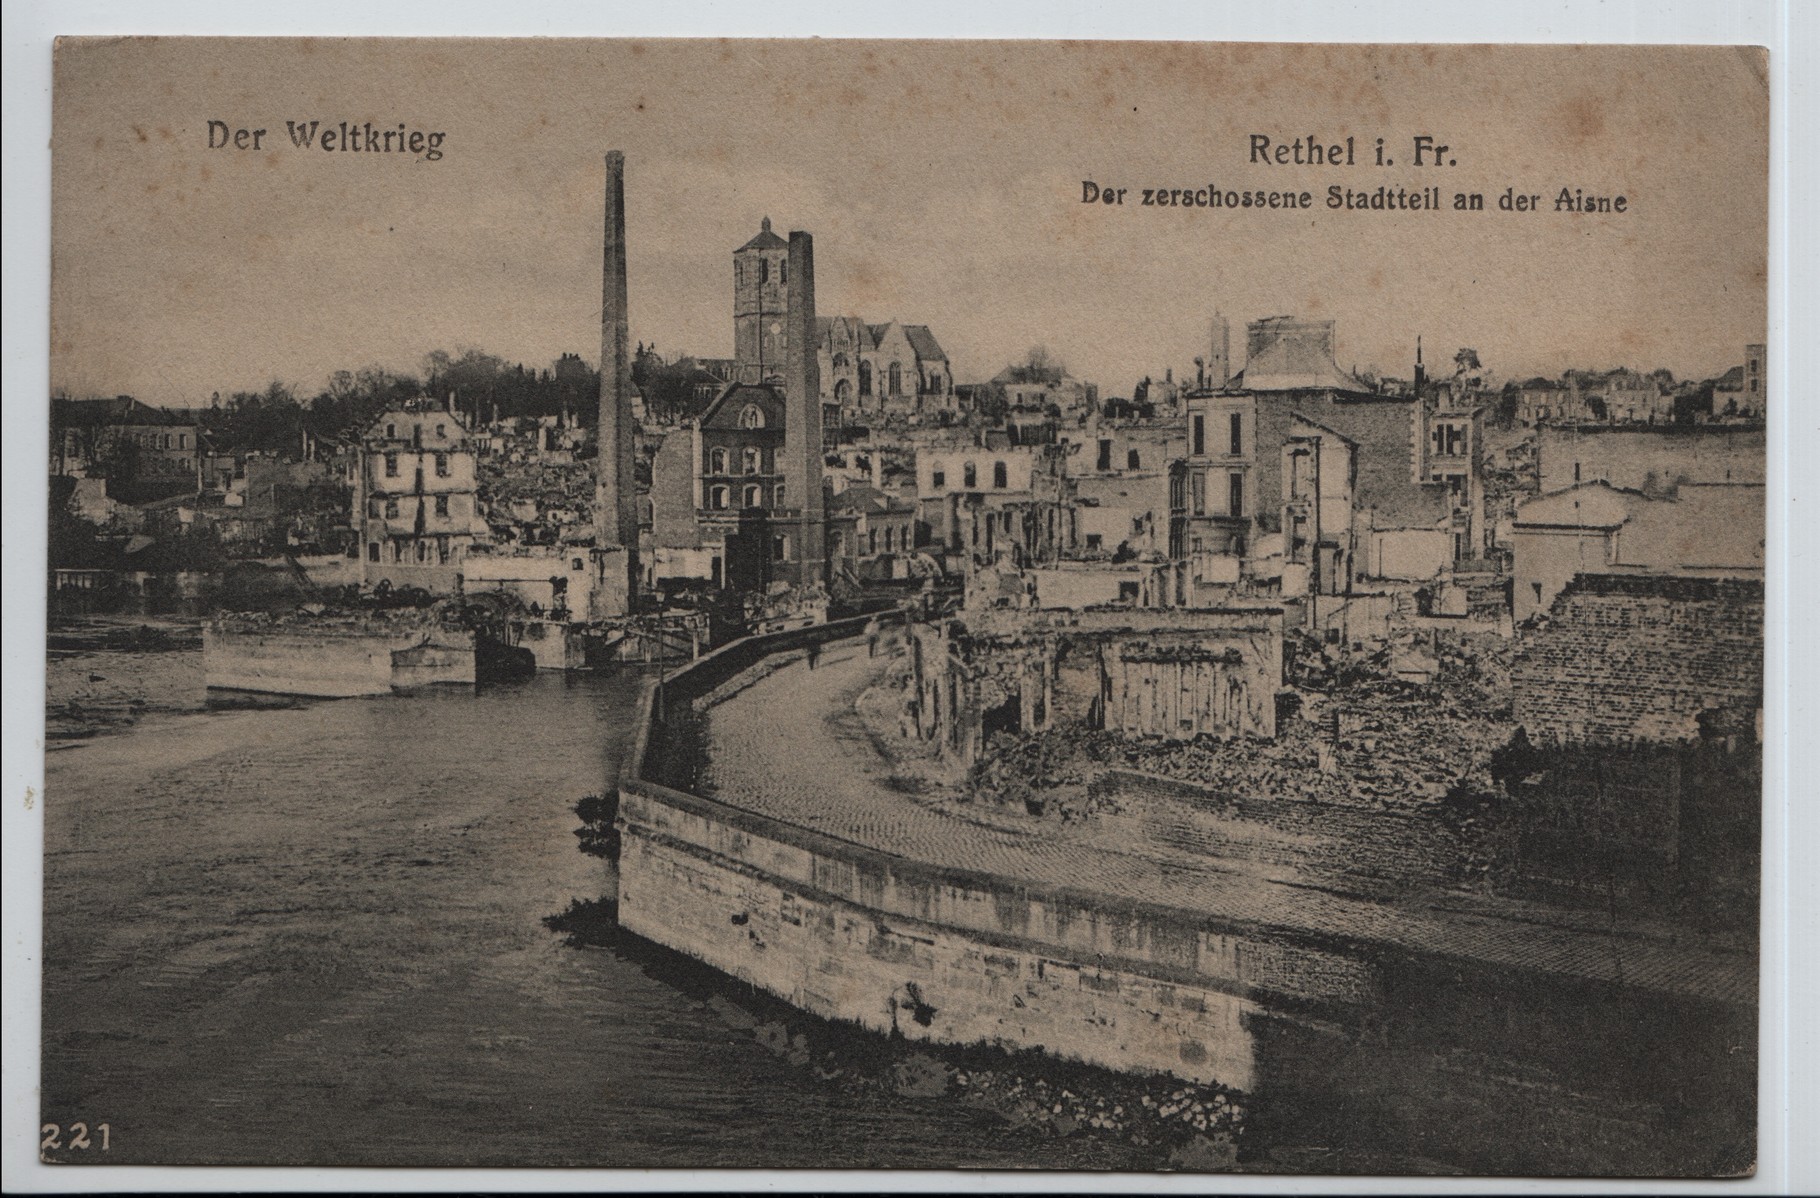 10 The war damaged district around the river Aisne